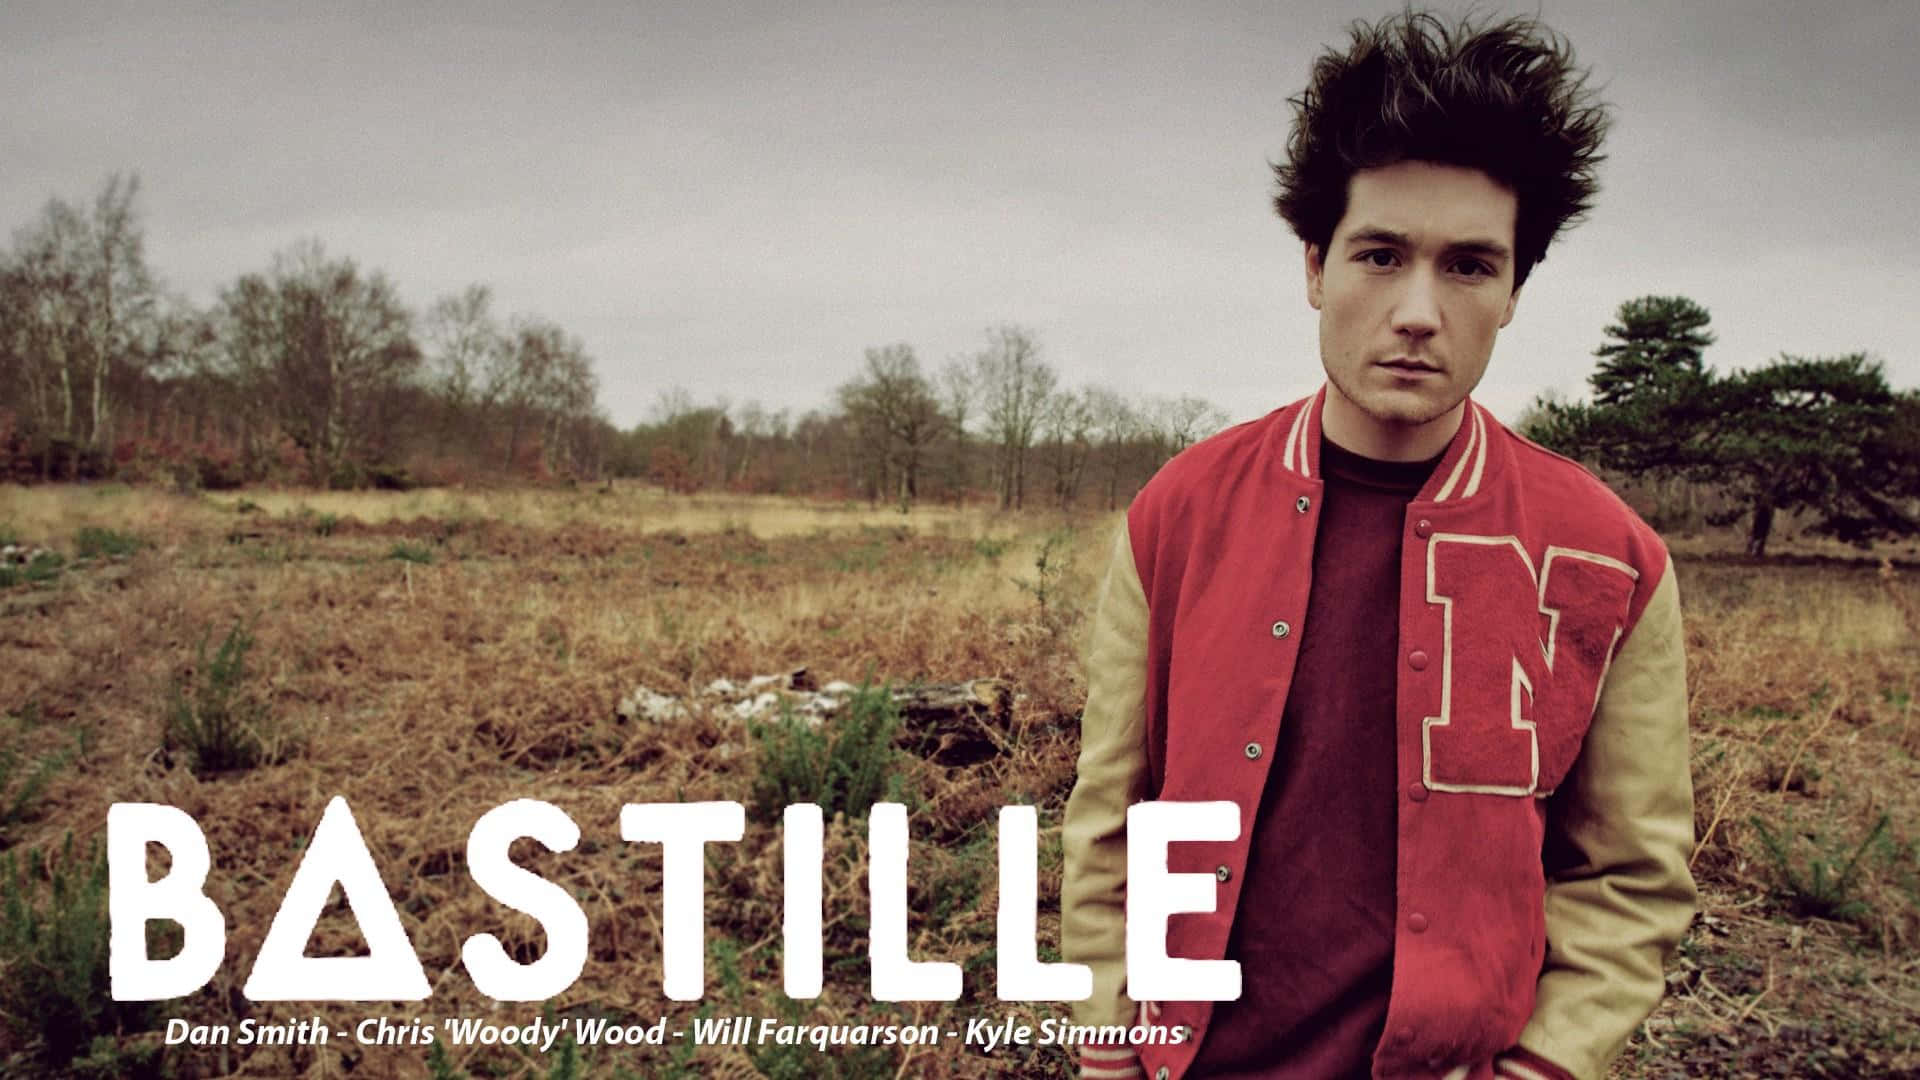 Bastilles - A Man In A Red Jacket Standing In A Field